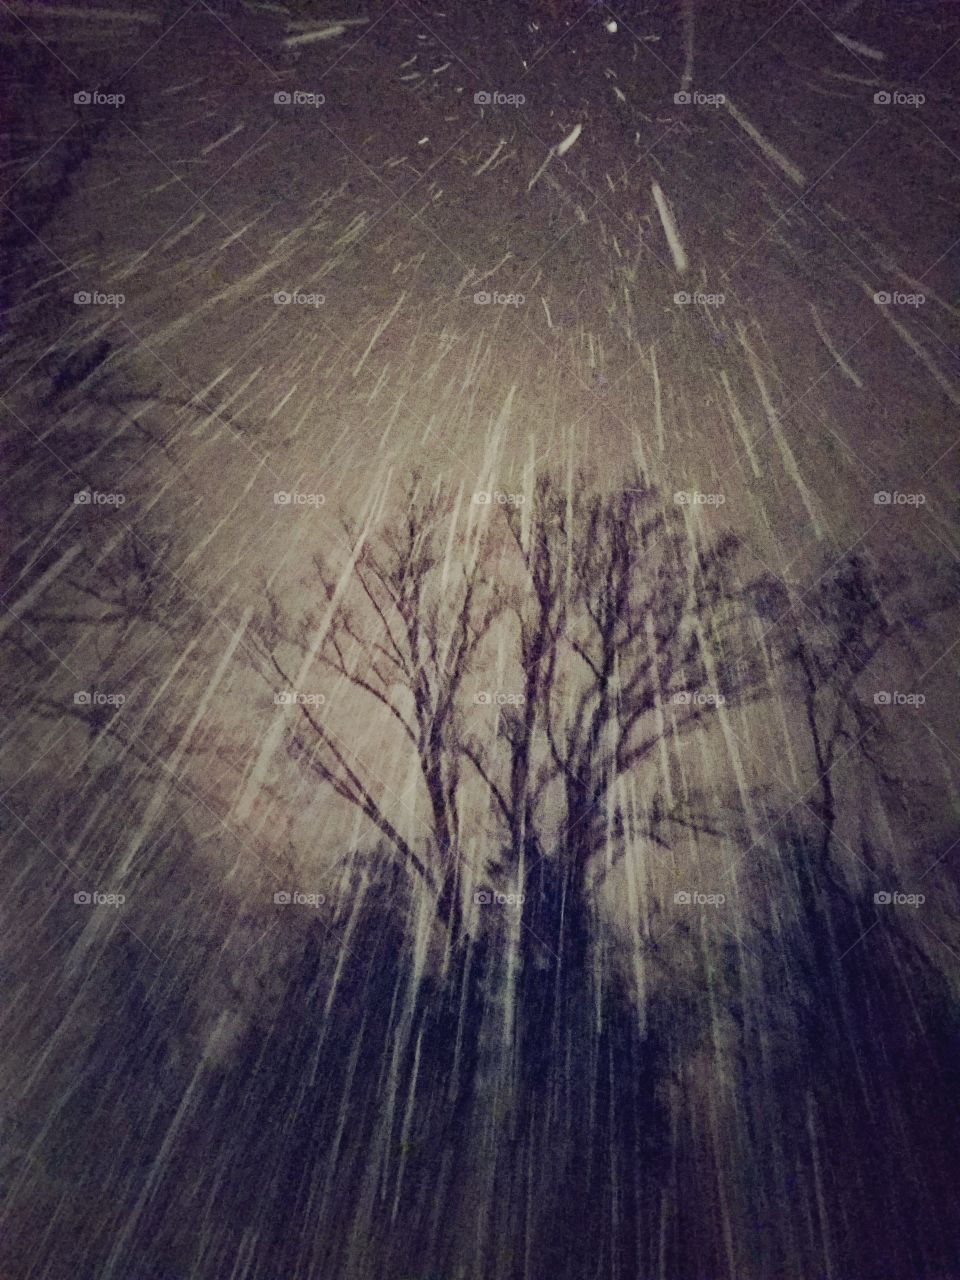 The start of the NJ Snowstorm at night